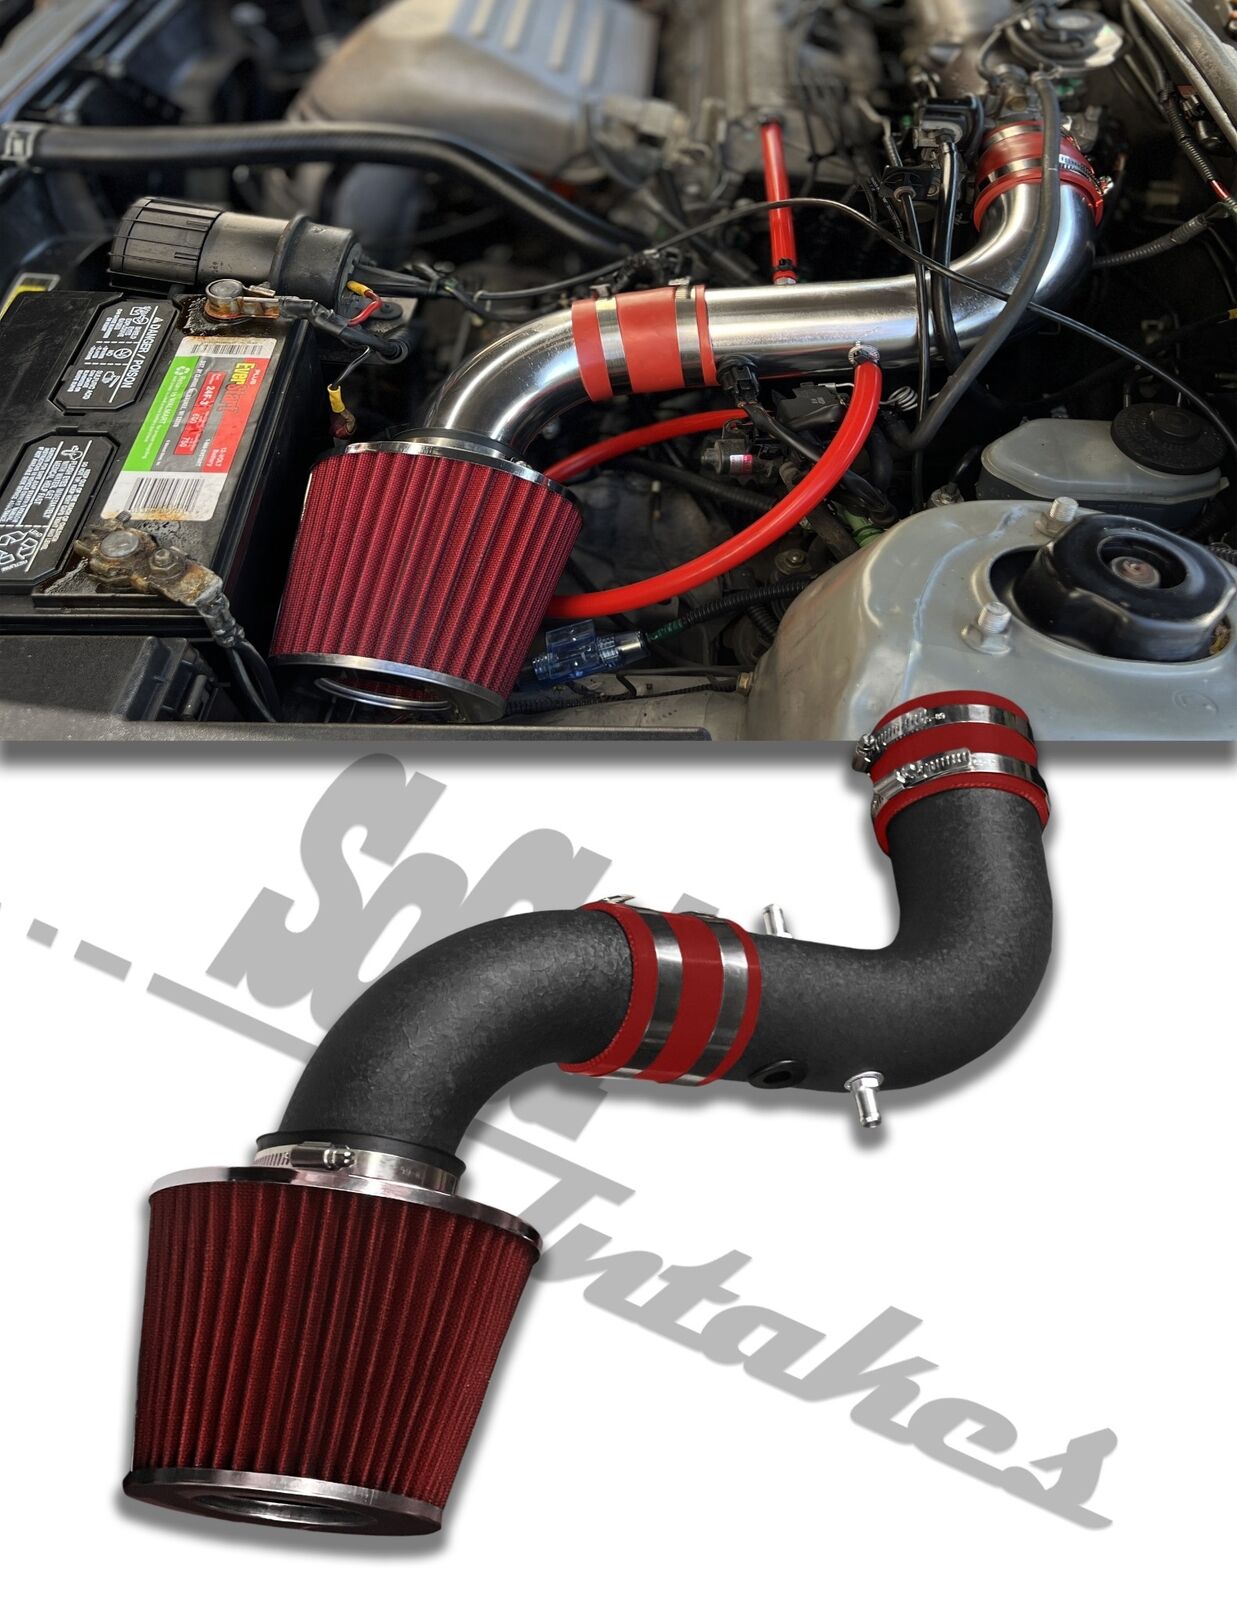 COATED BLACK RED Air Intake Kit and Filter For 1998-2001 Toyota Camry Solara 2.2